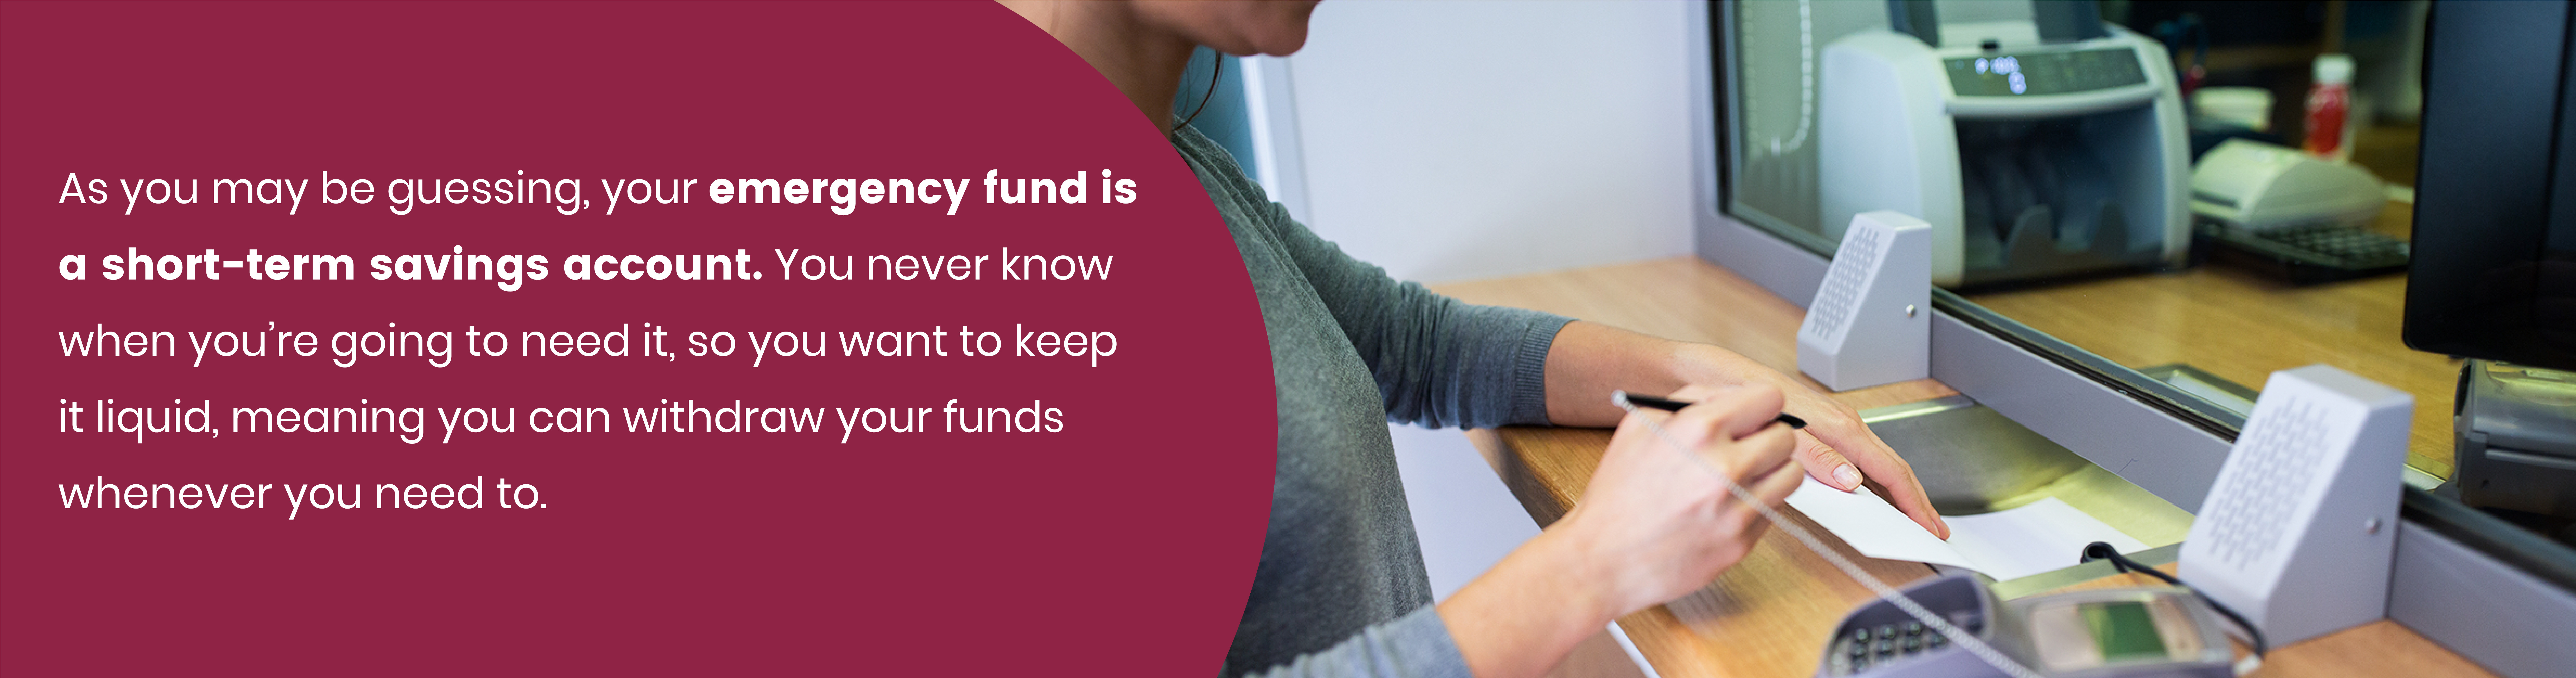 As you may be guessing, your emergency fund is a short-term savings account. You never know when you're going to need it, so you want to keep it liquid, meaning you can withdraw your funds whenever you need to.